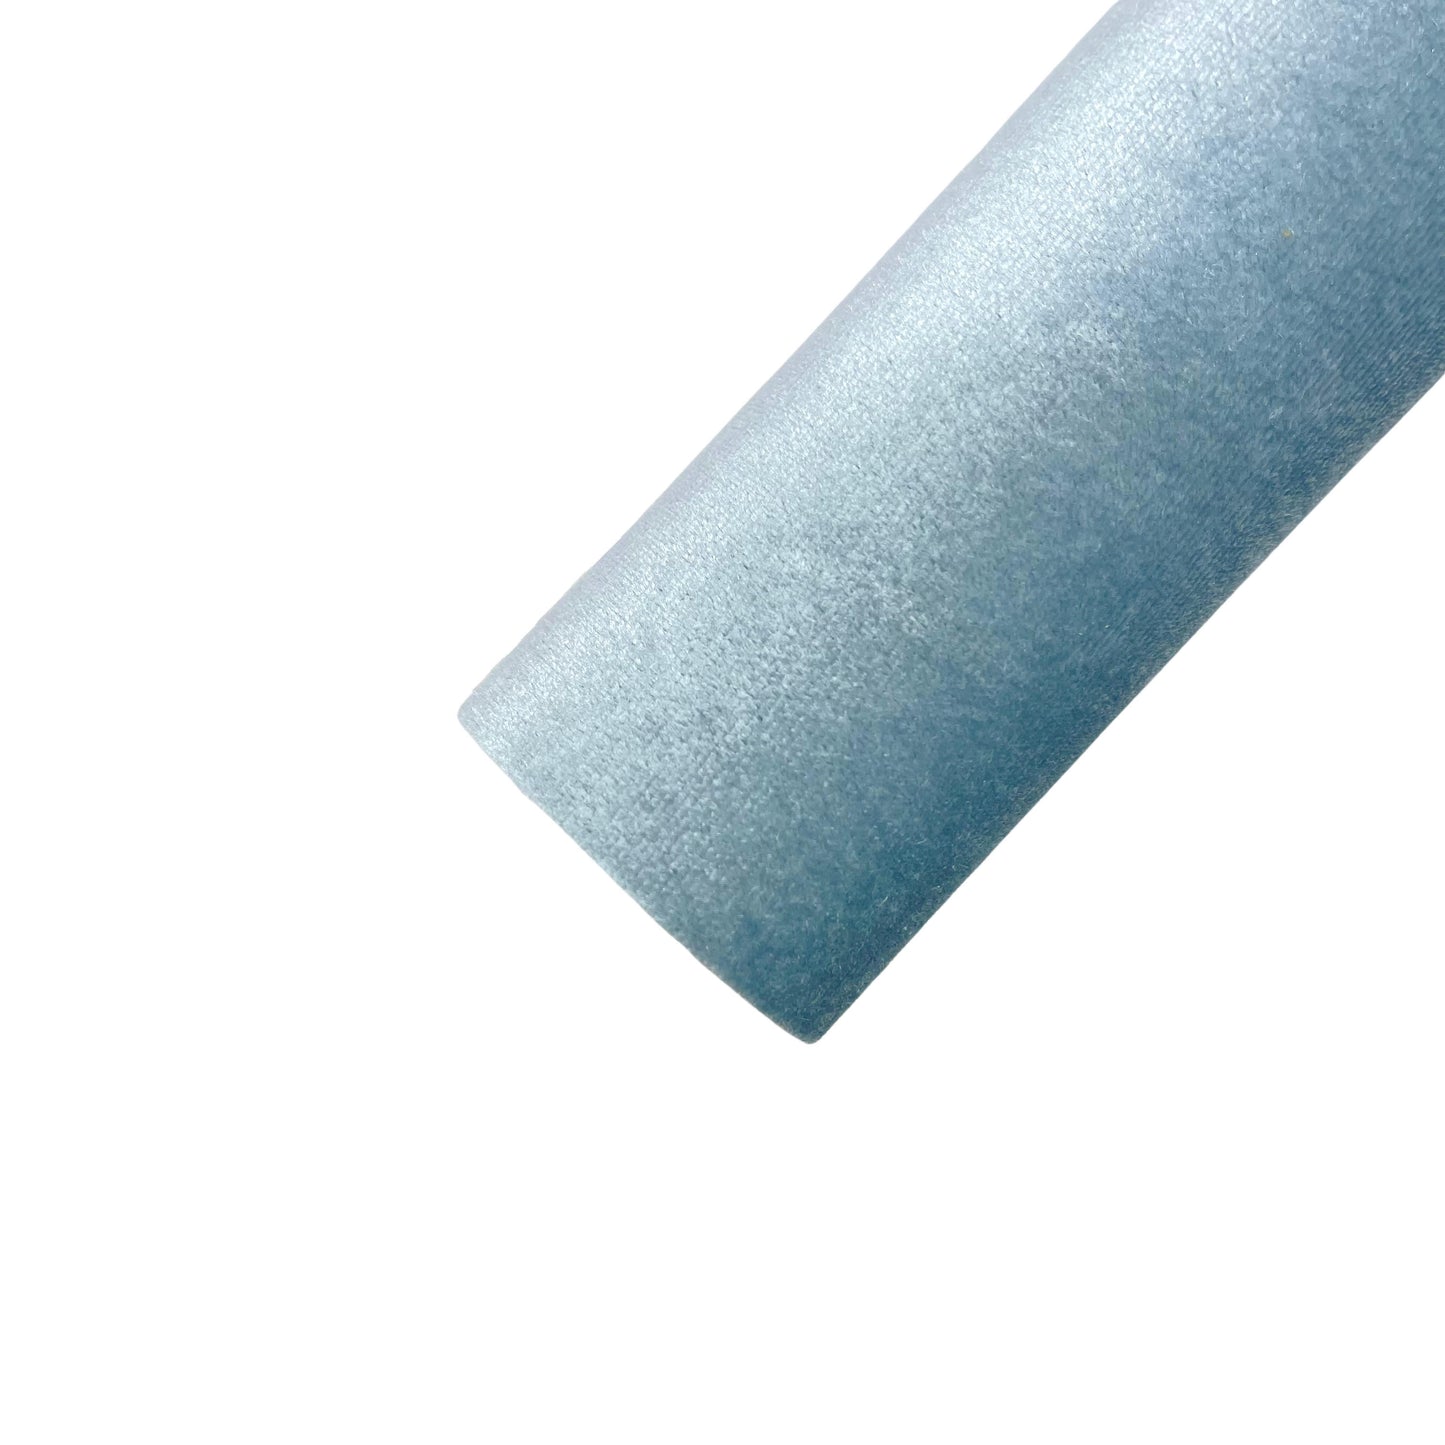 Rolled solid colored velvet sheet in smoky grey blue..